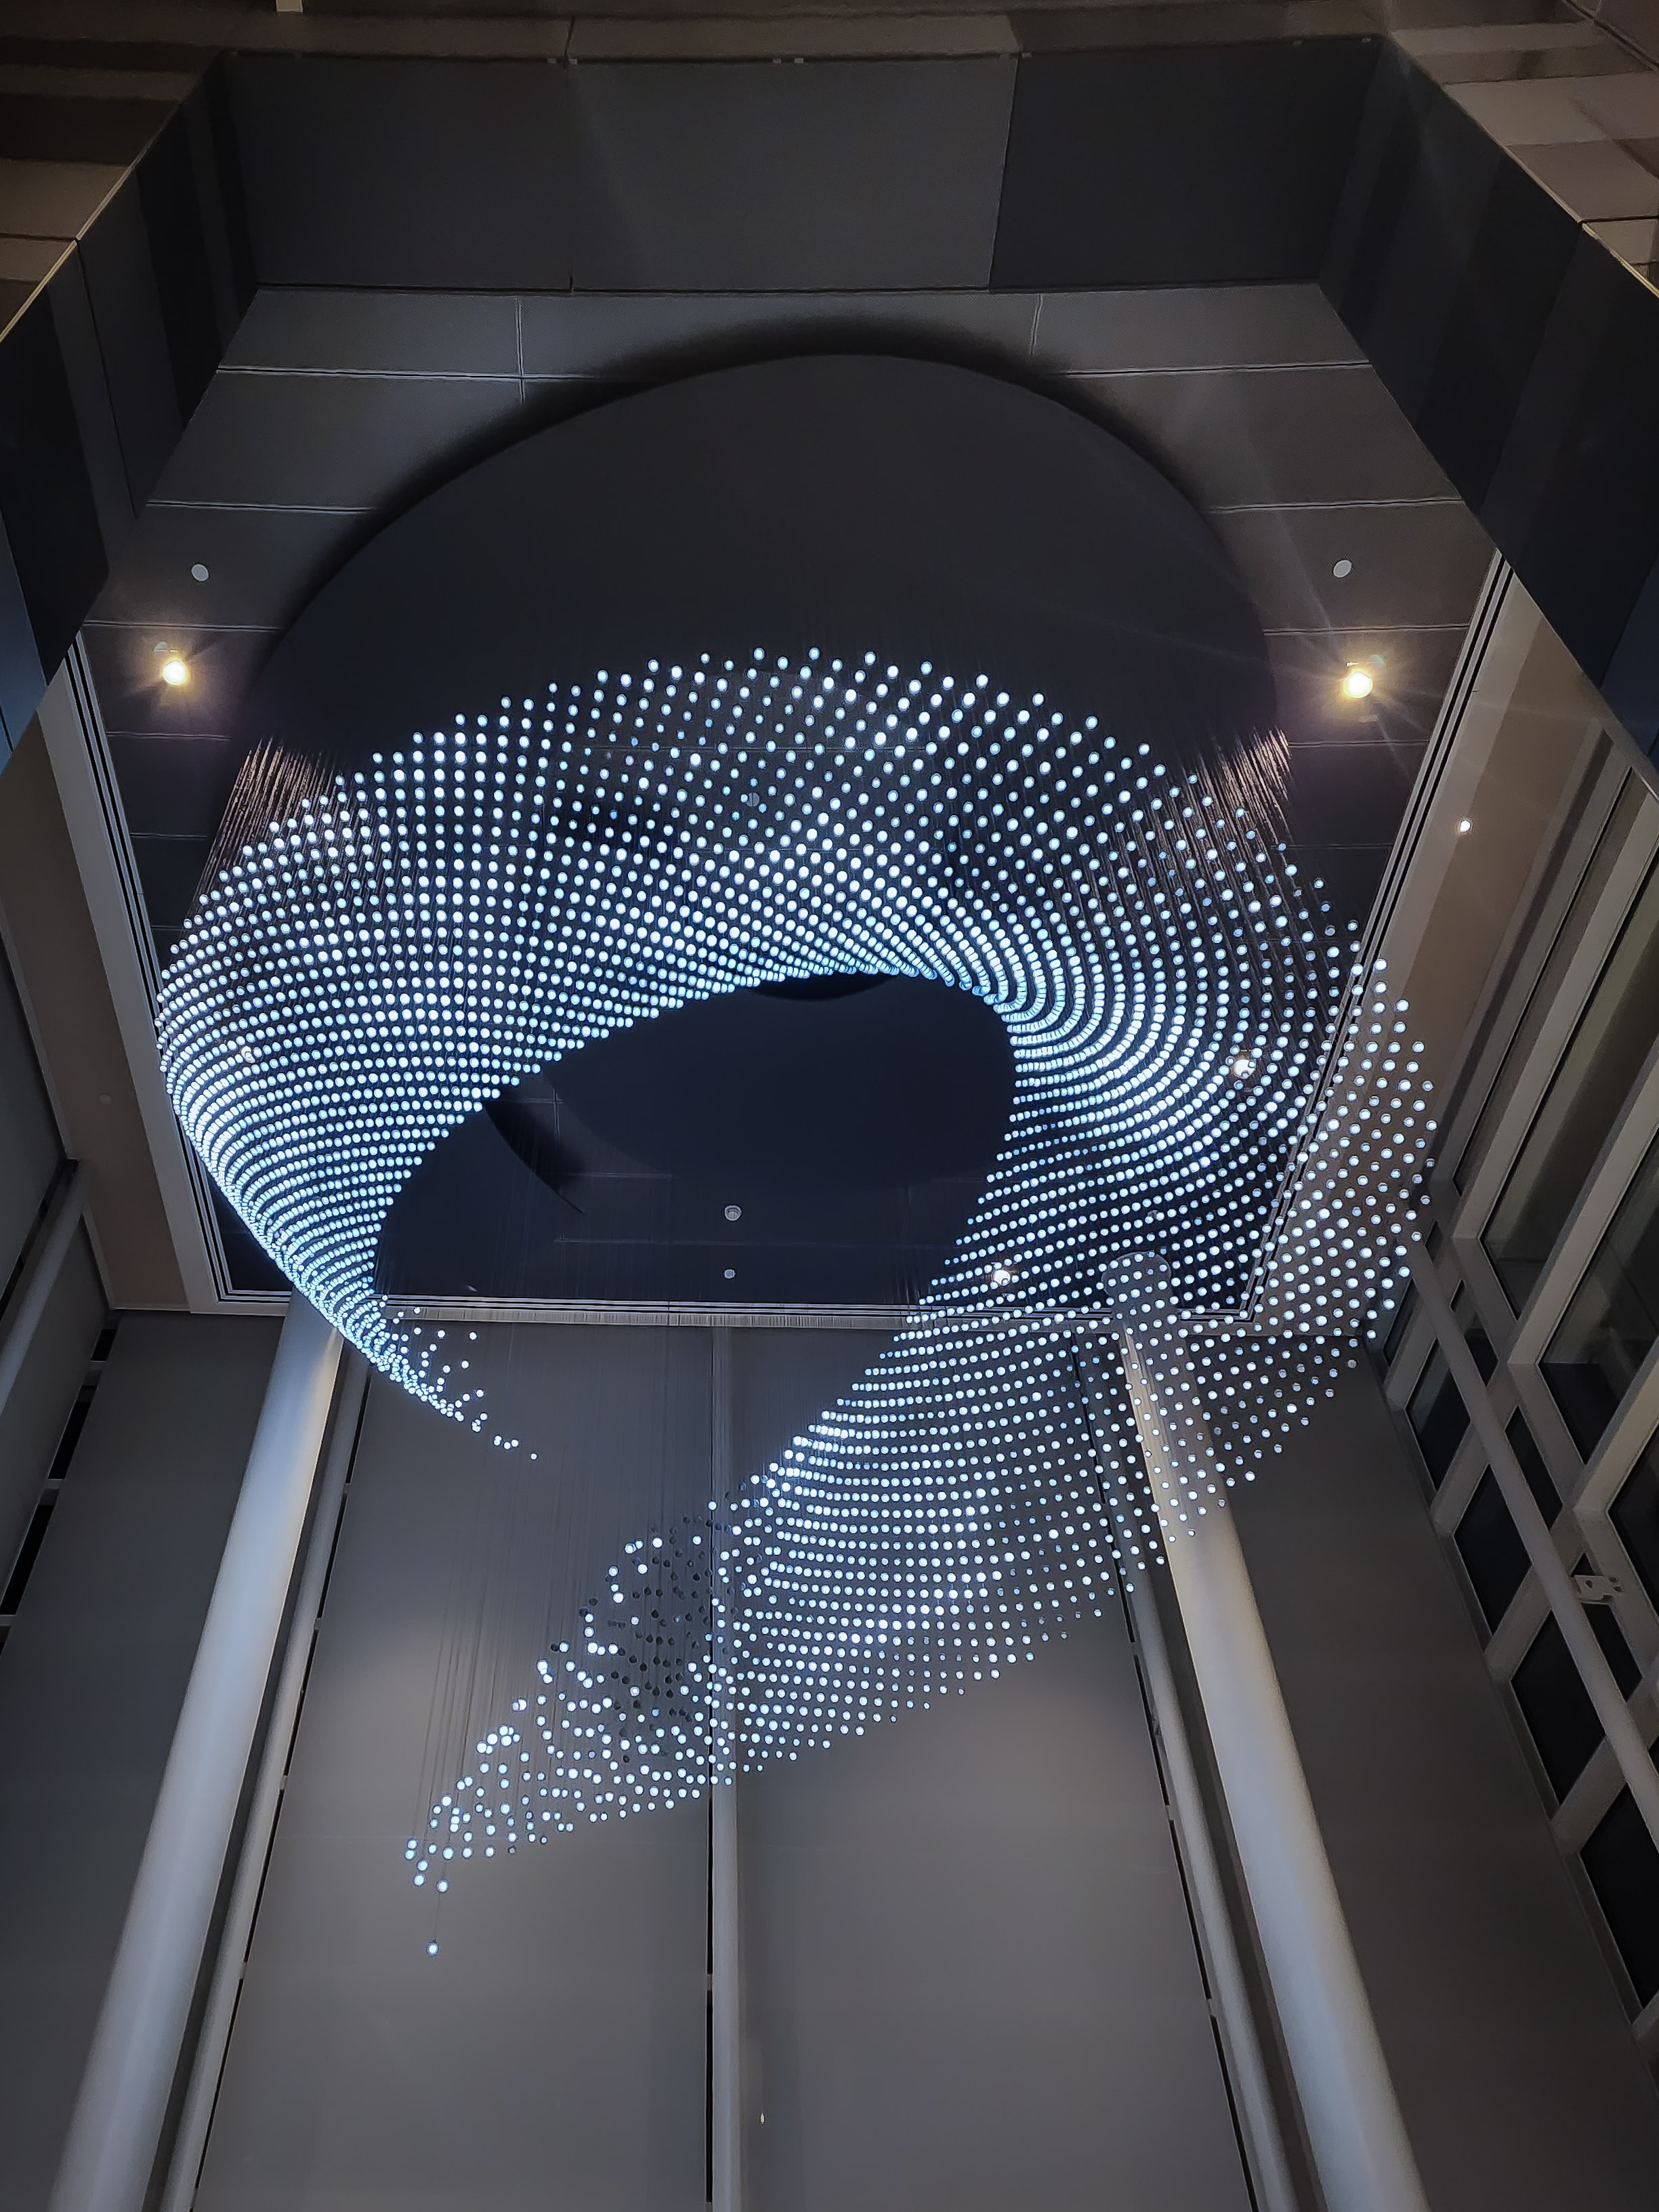 Helical Trace by Jim Campbell (2022), LUMA Hotel, corner of Third and Channel streets. Photo by Aaron Danzig.